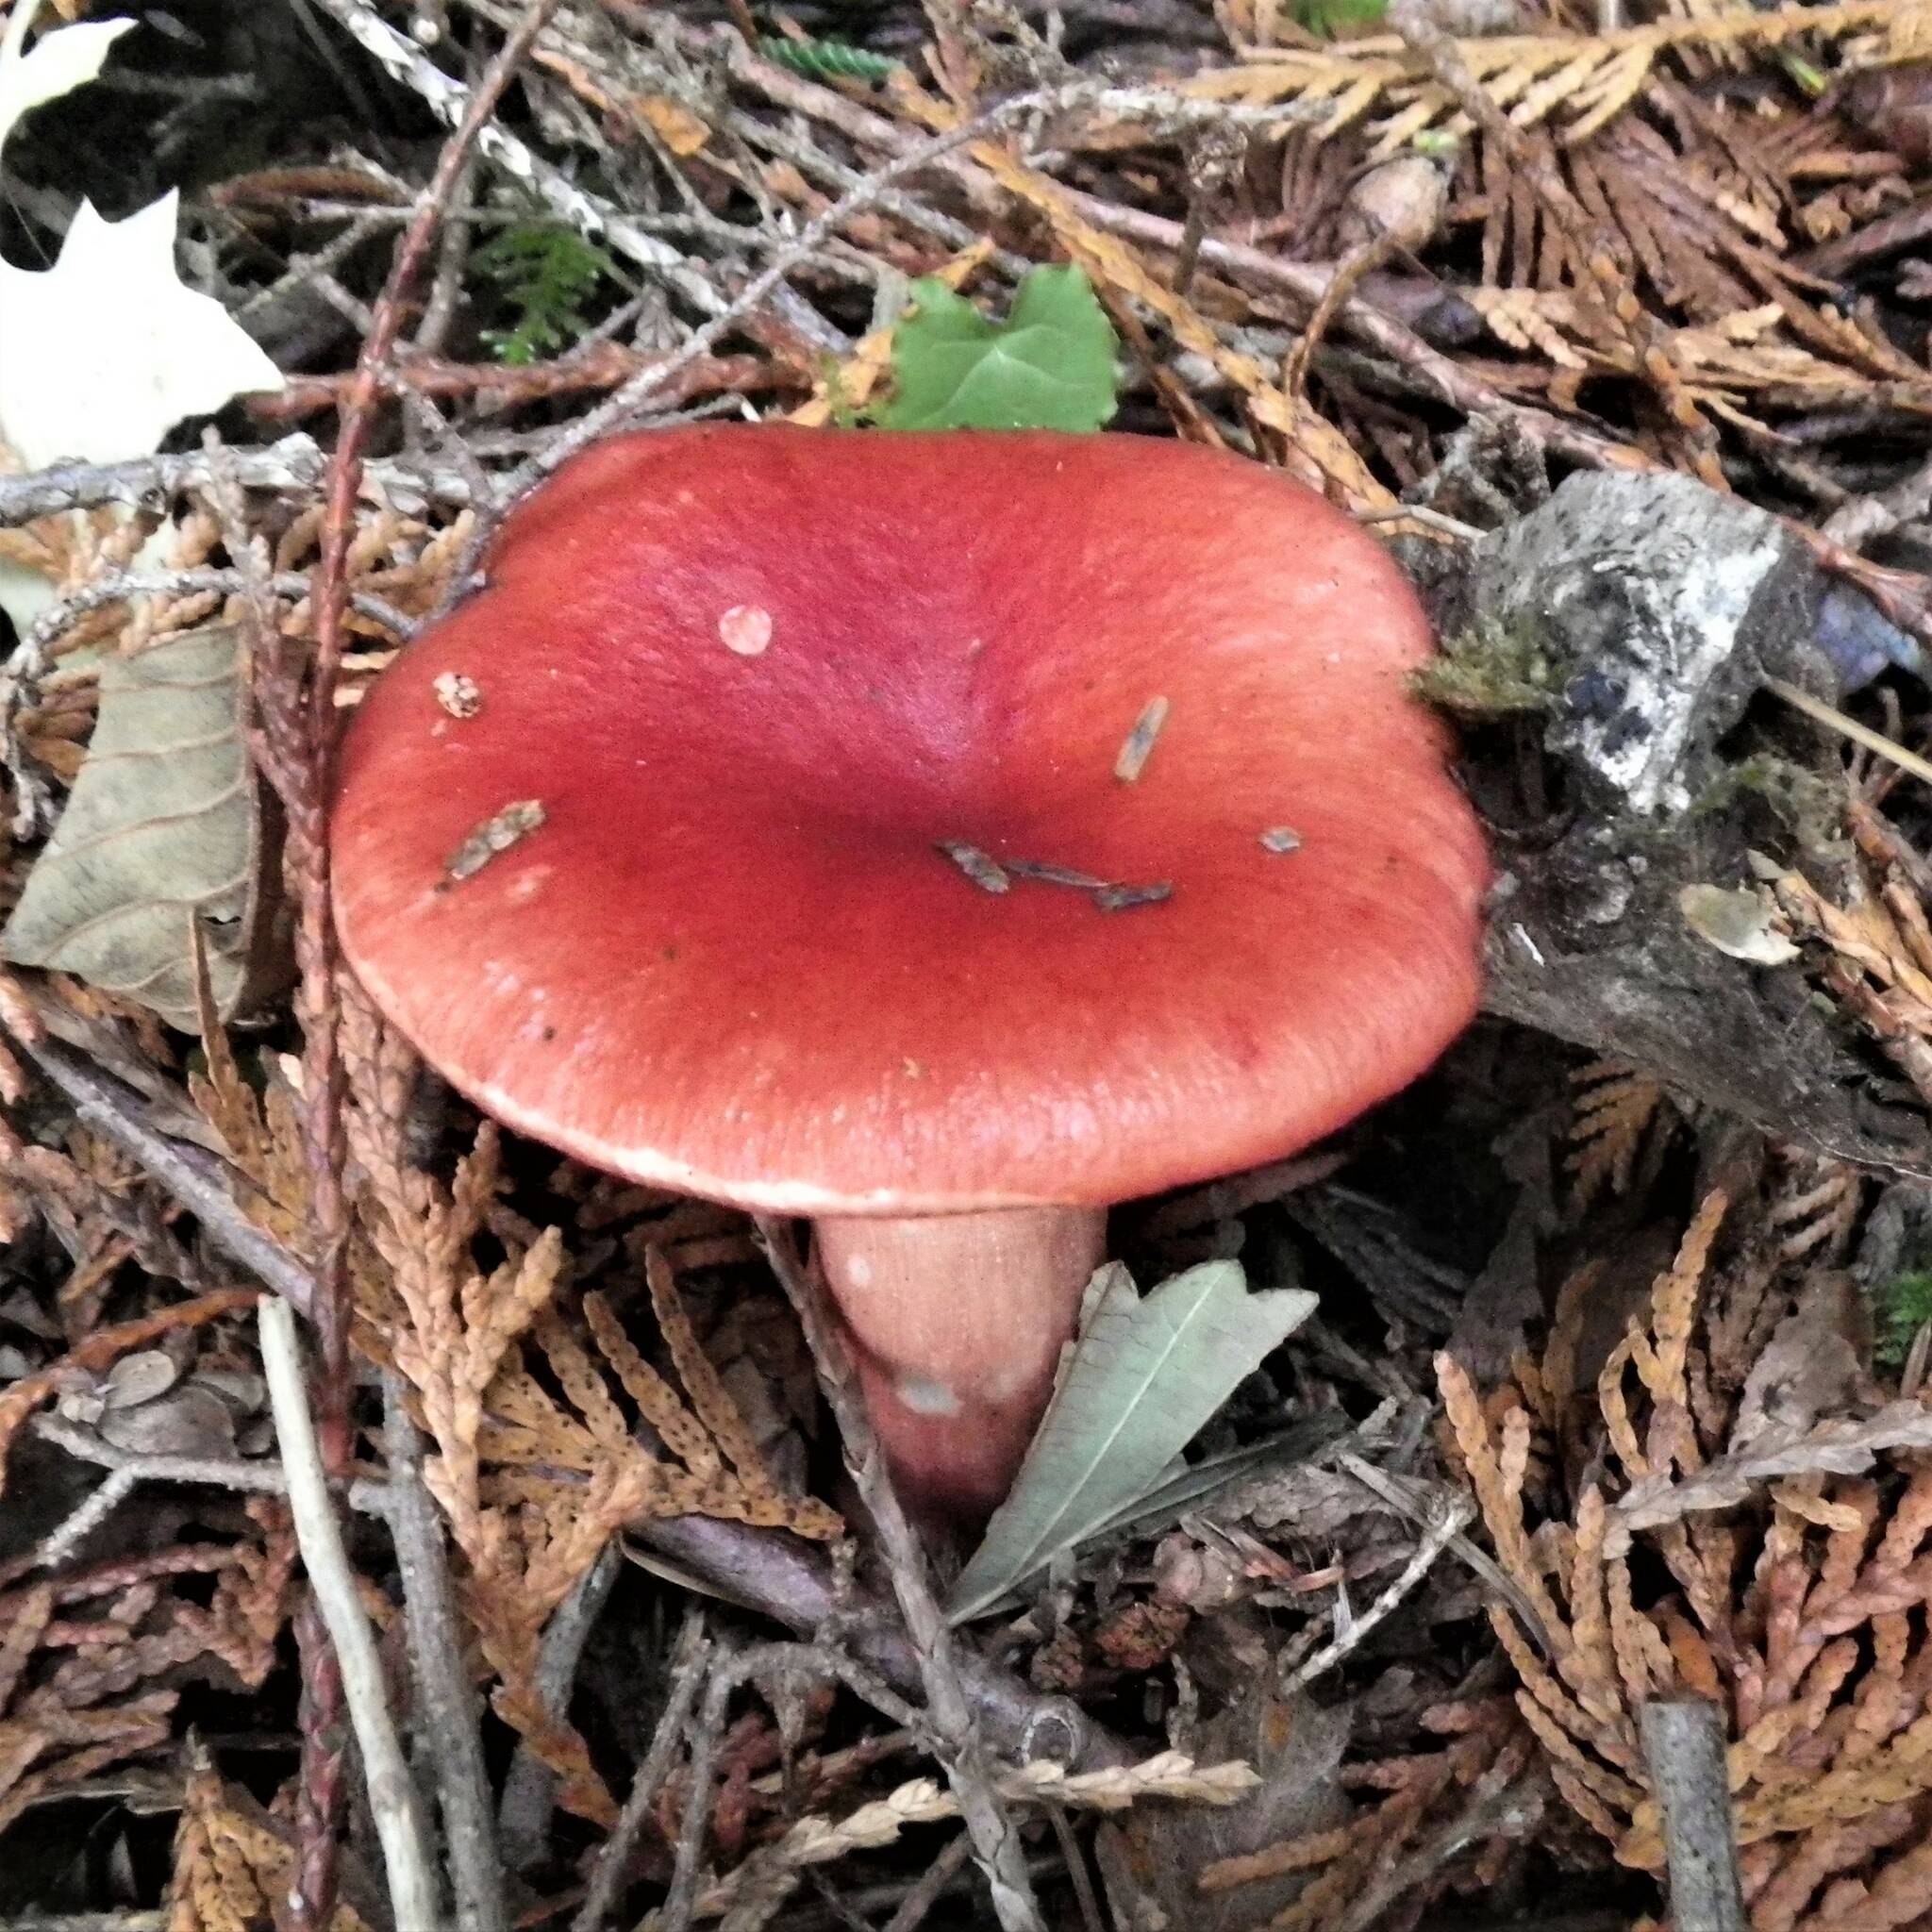 Rosy Russula is one of the widespread and until recently very common mycorrhizal fungi associated with coniferous woodlands in the islands.